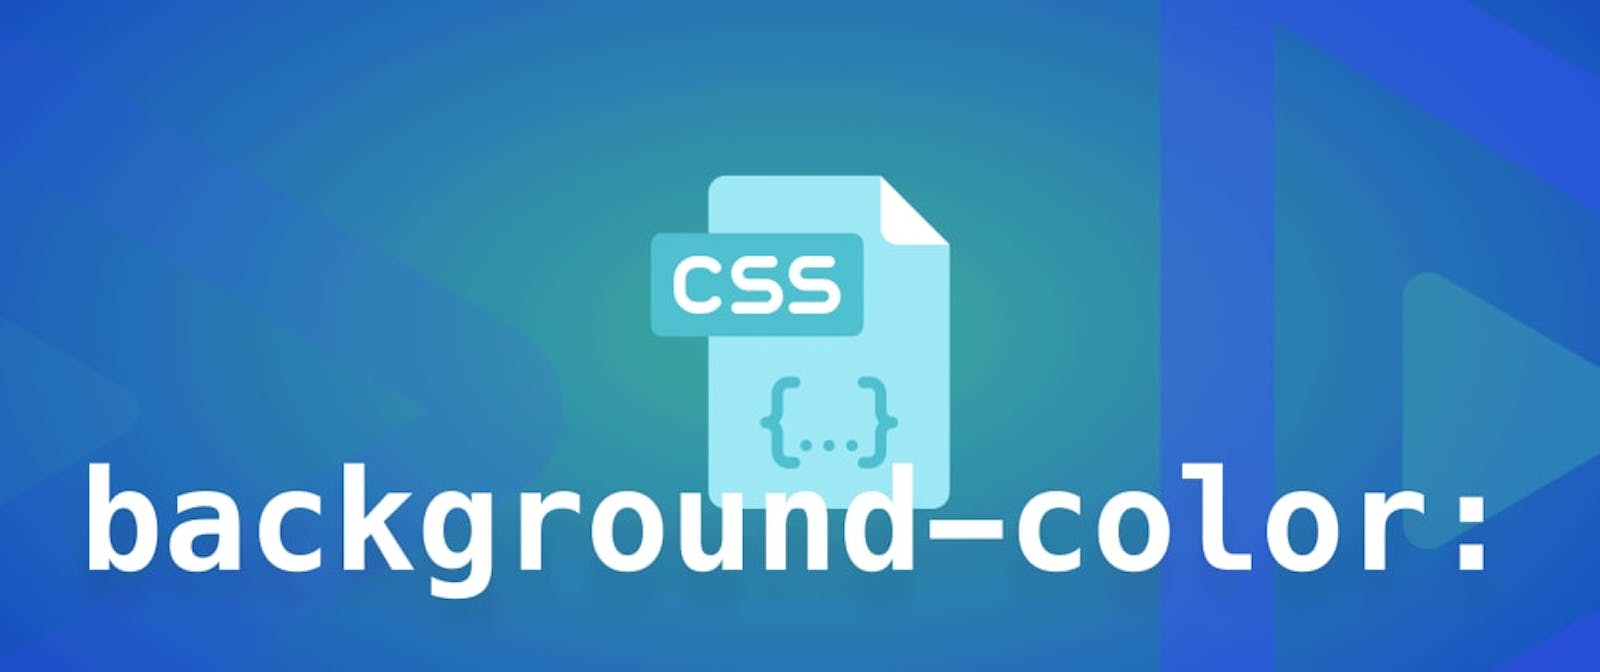 Using the CSS background-color property to debug web pages